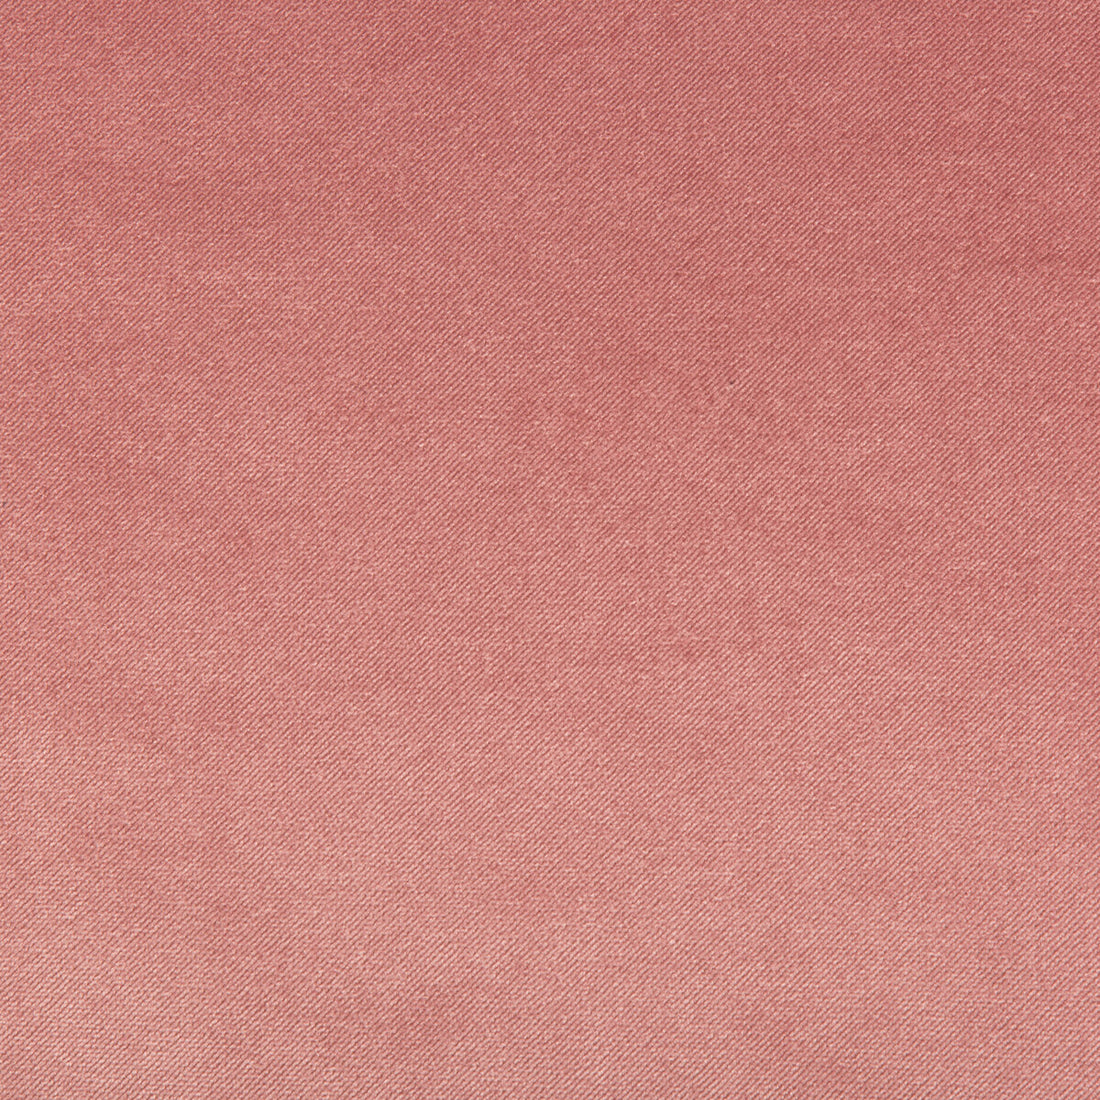 Madison Velvet fabric in pomelo color - pattern 35402.7.0 - by Kravet Contract